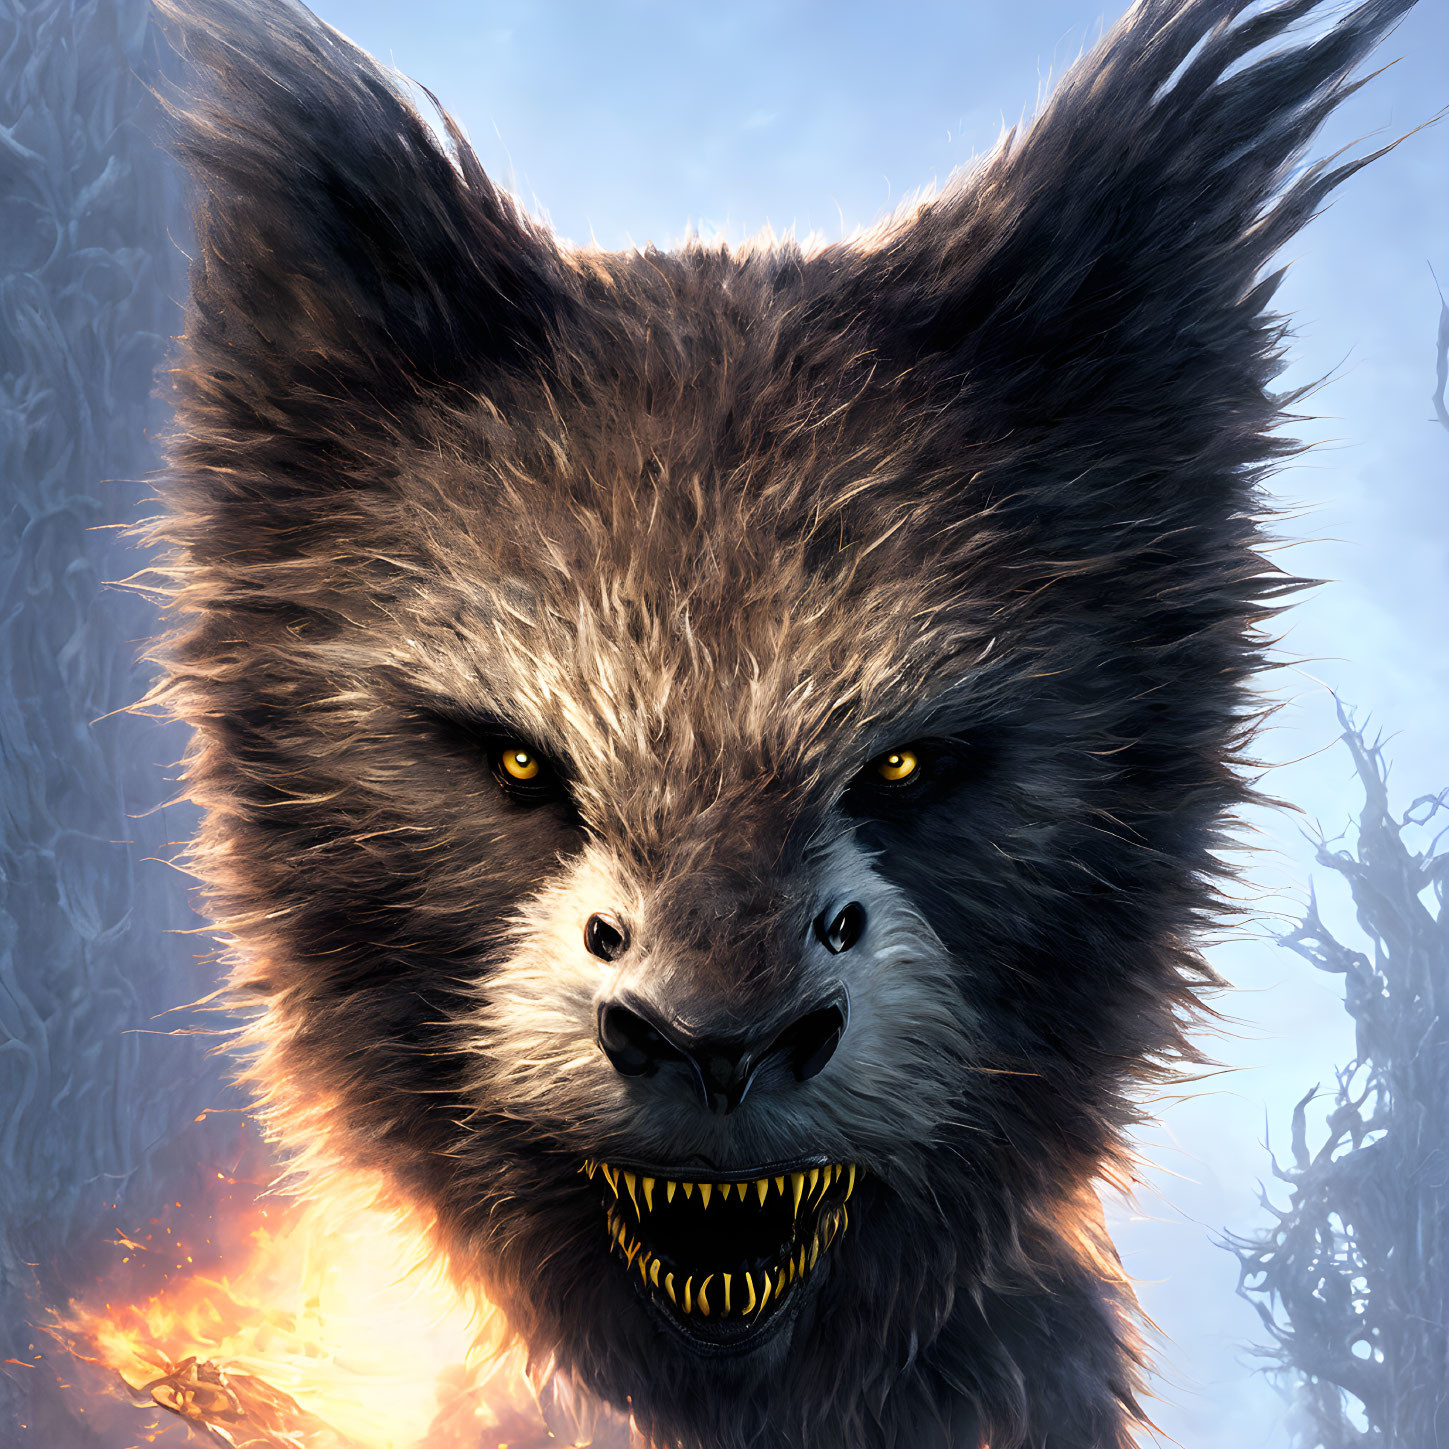 Detailed Illustration of Fierce Wolf with Yellow Eyes in Icy Forest and Flames